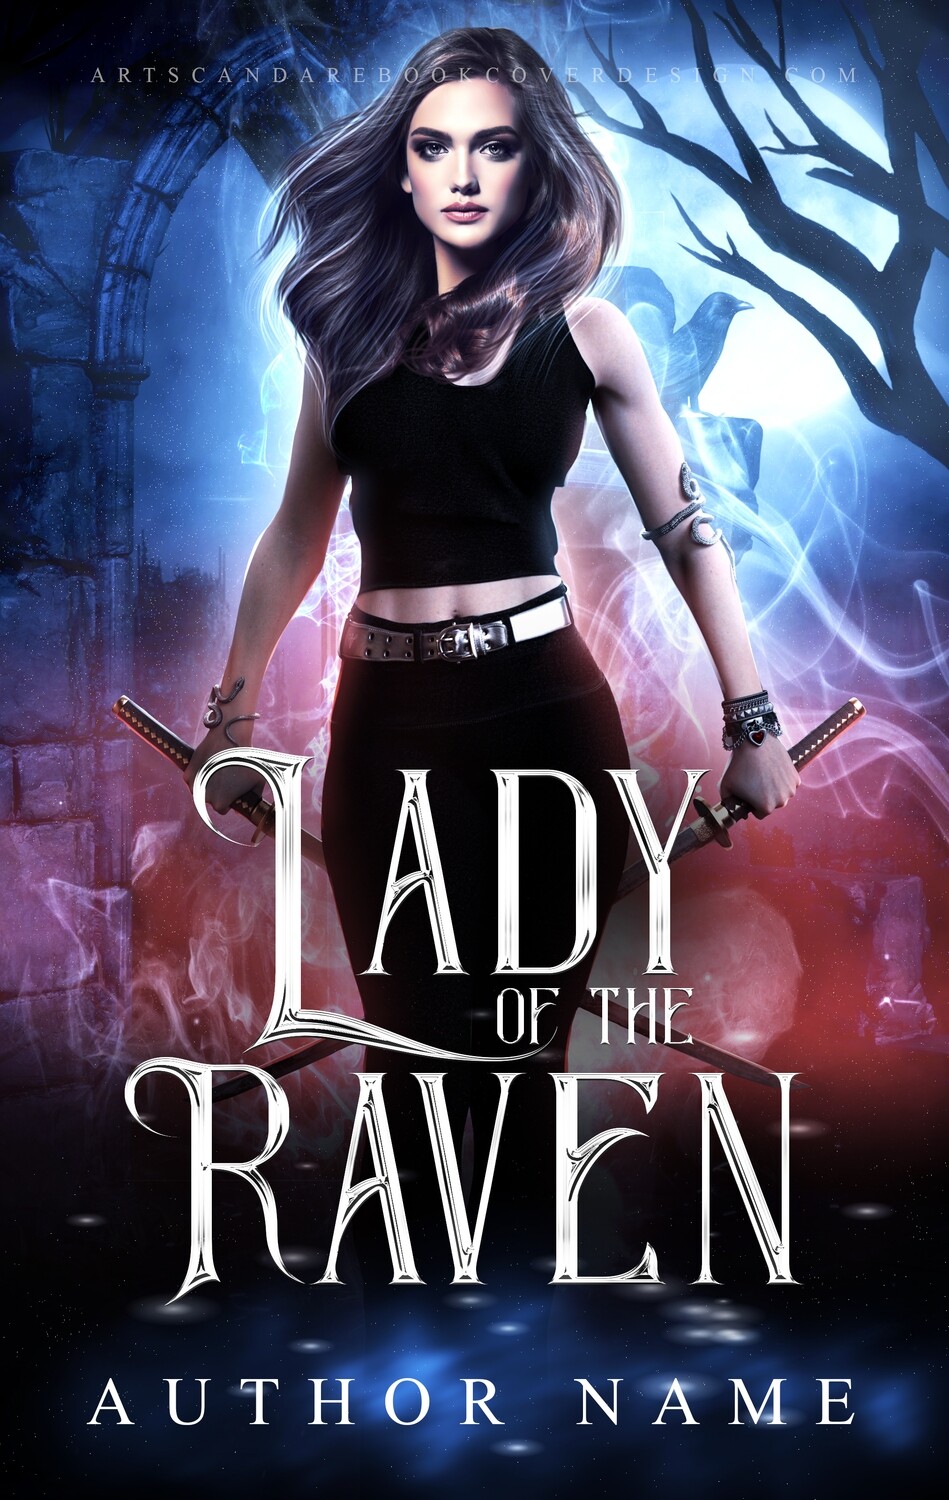 LADY OF THE RAVEN